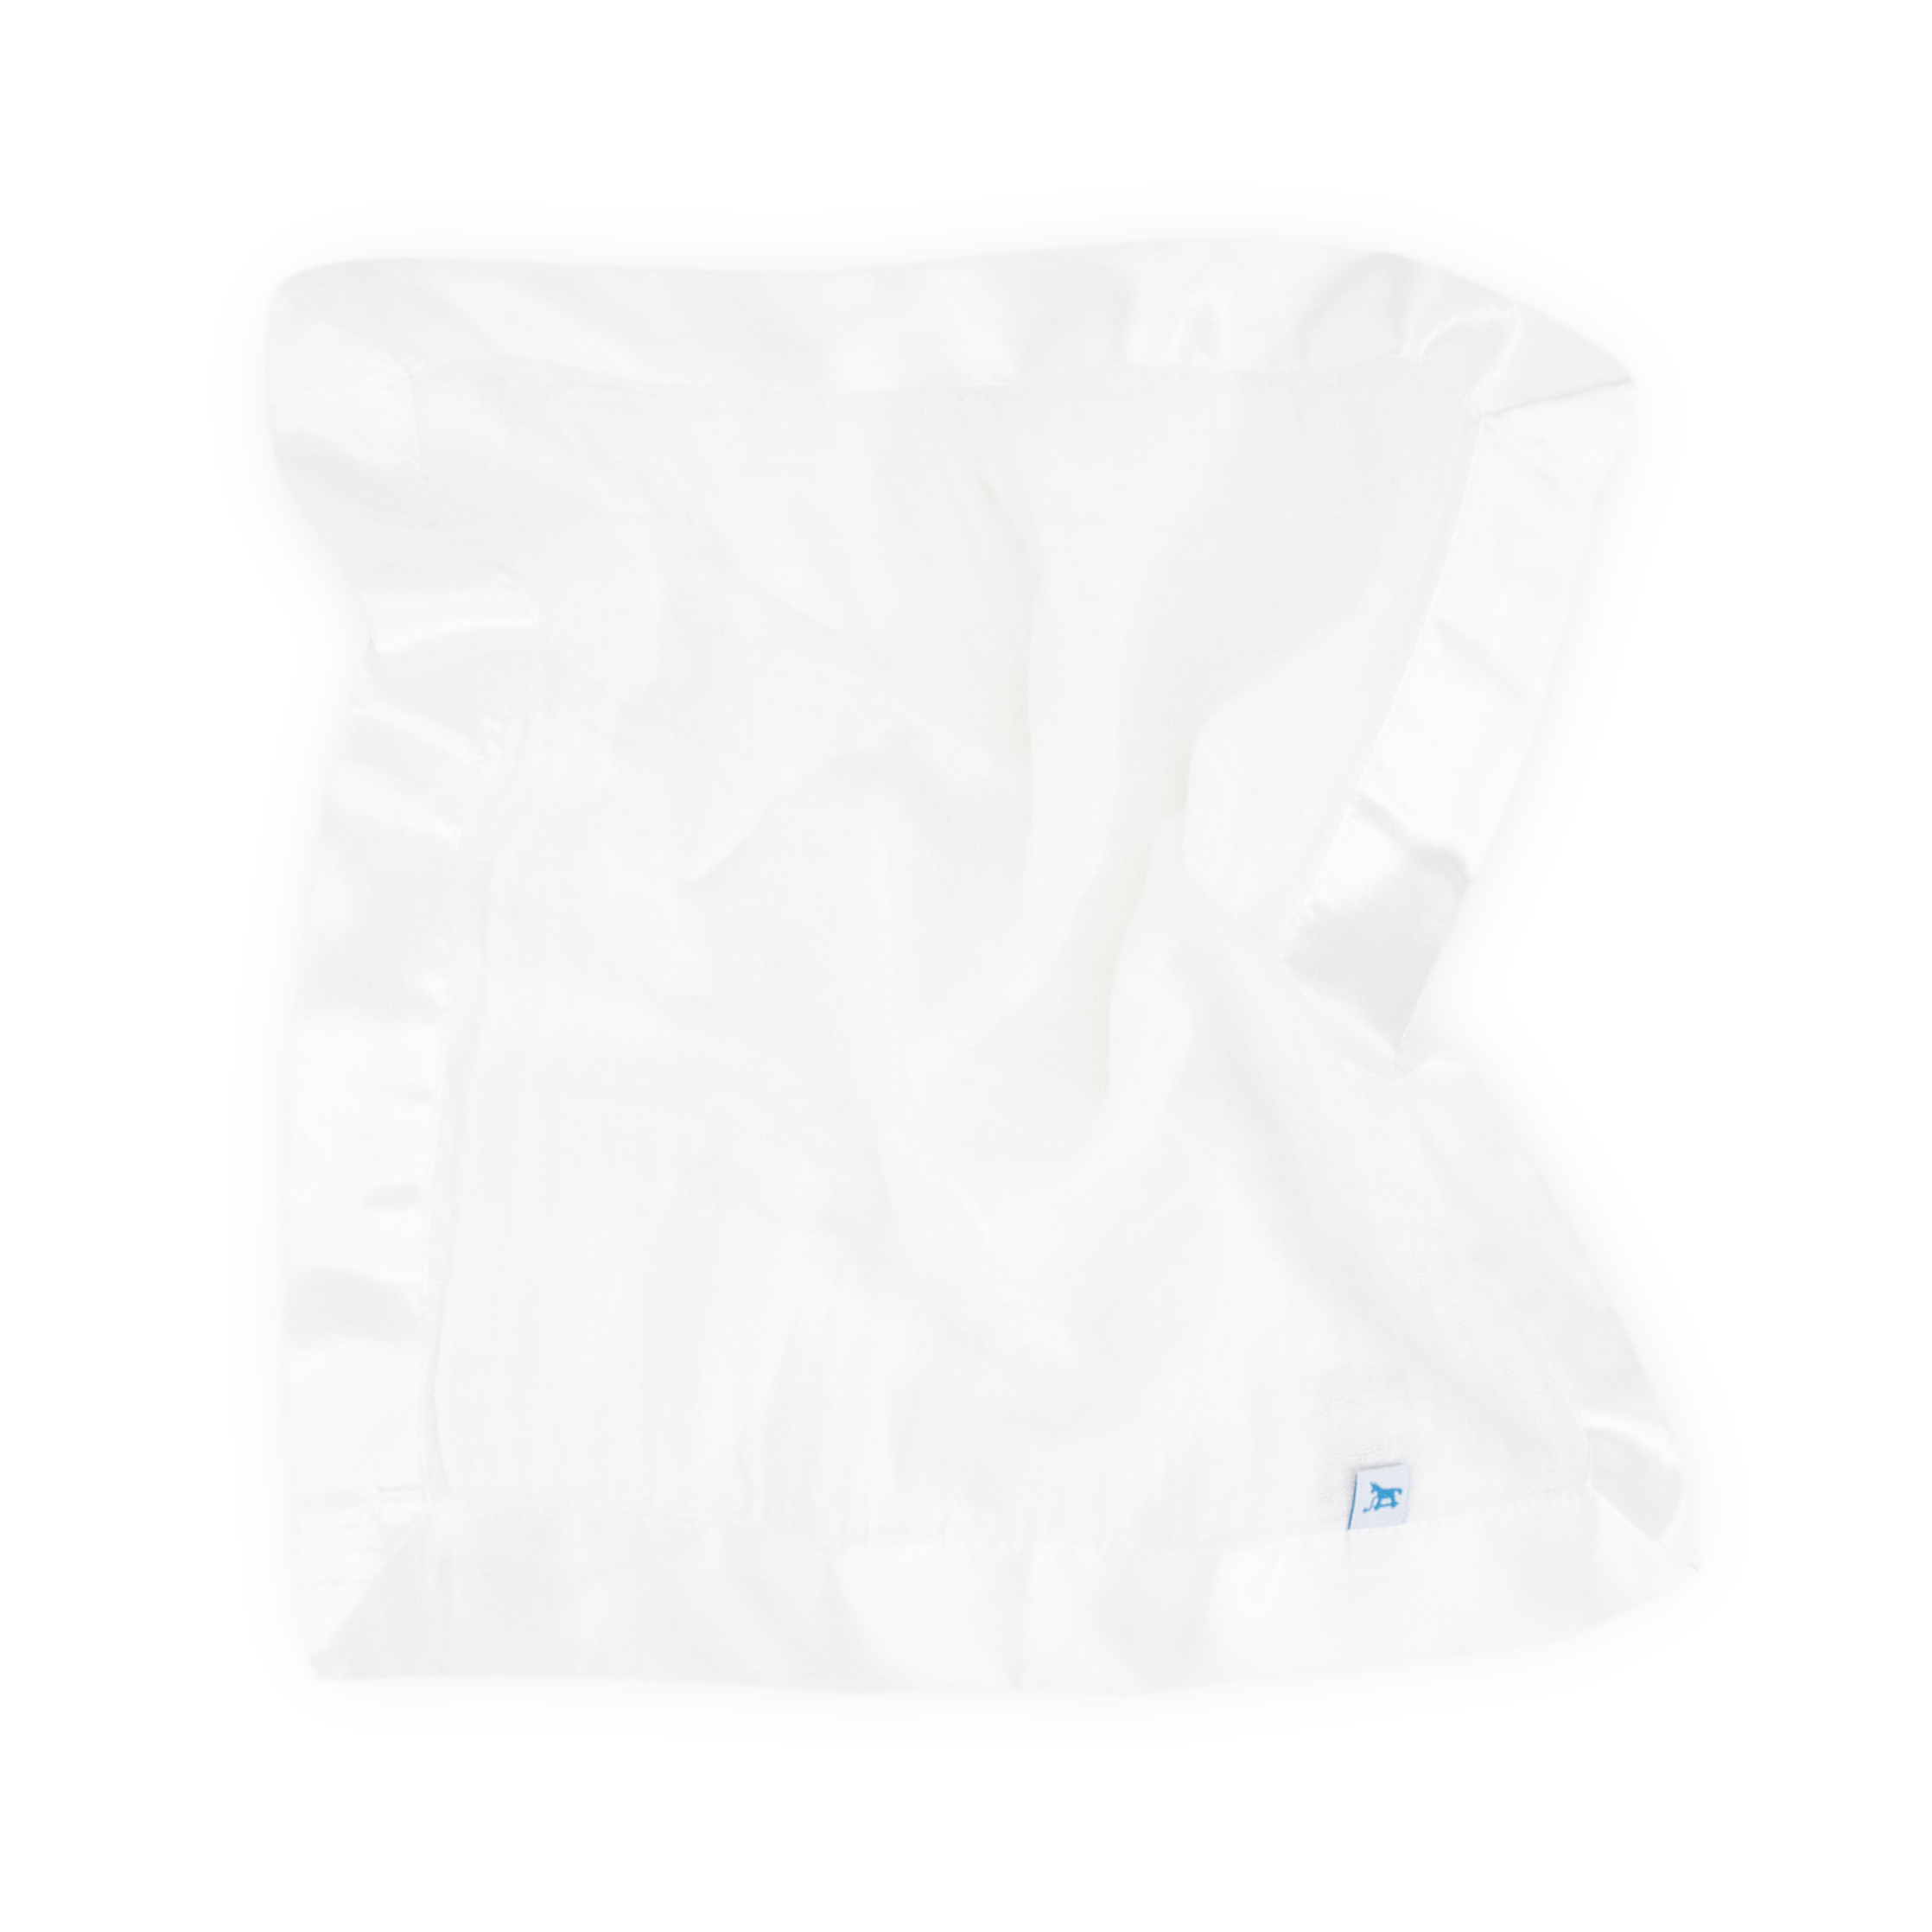 Cotton Muslin Security Blanket 3 Pack - White